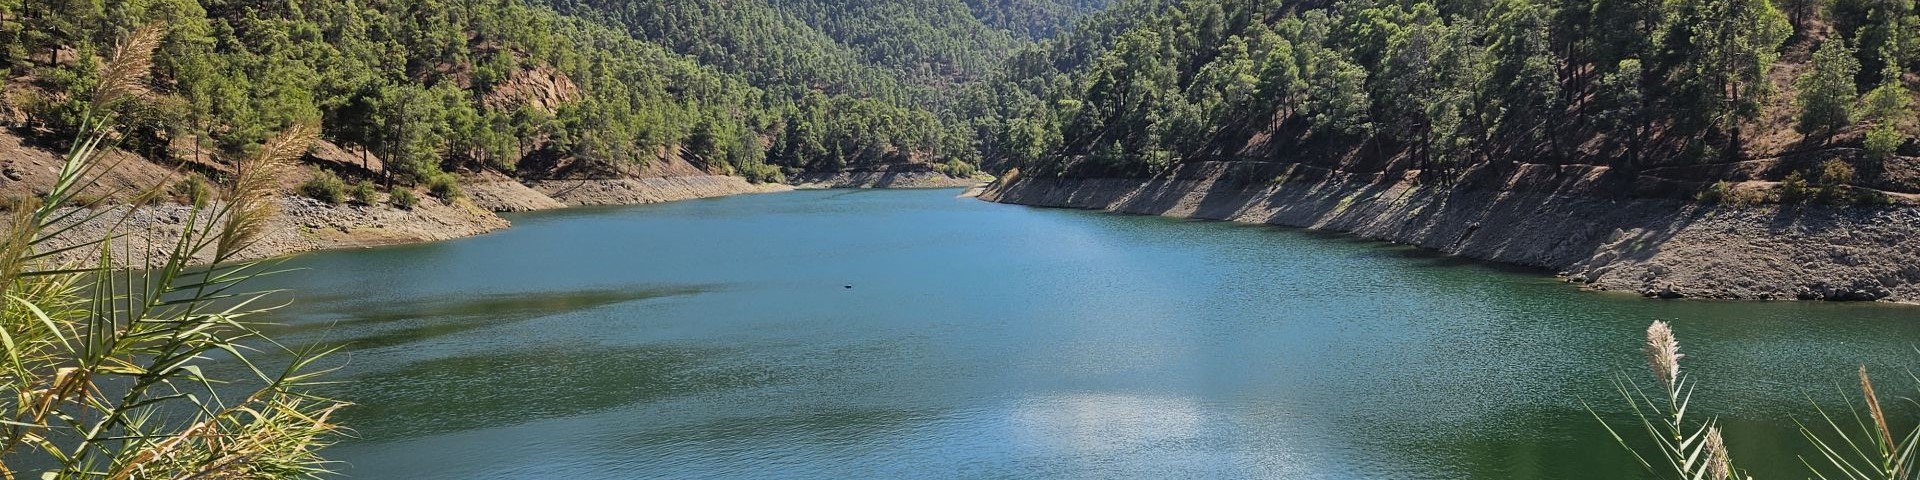 A reservoir located in a green, mountainous landscape